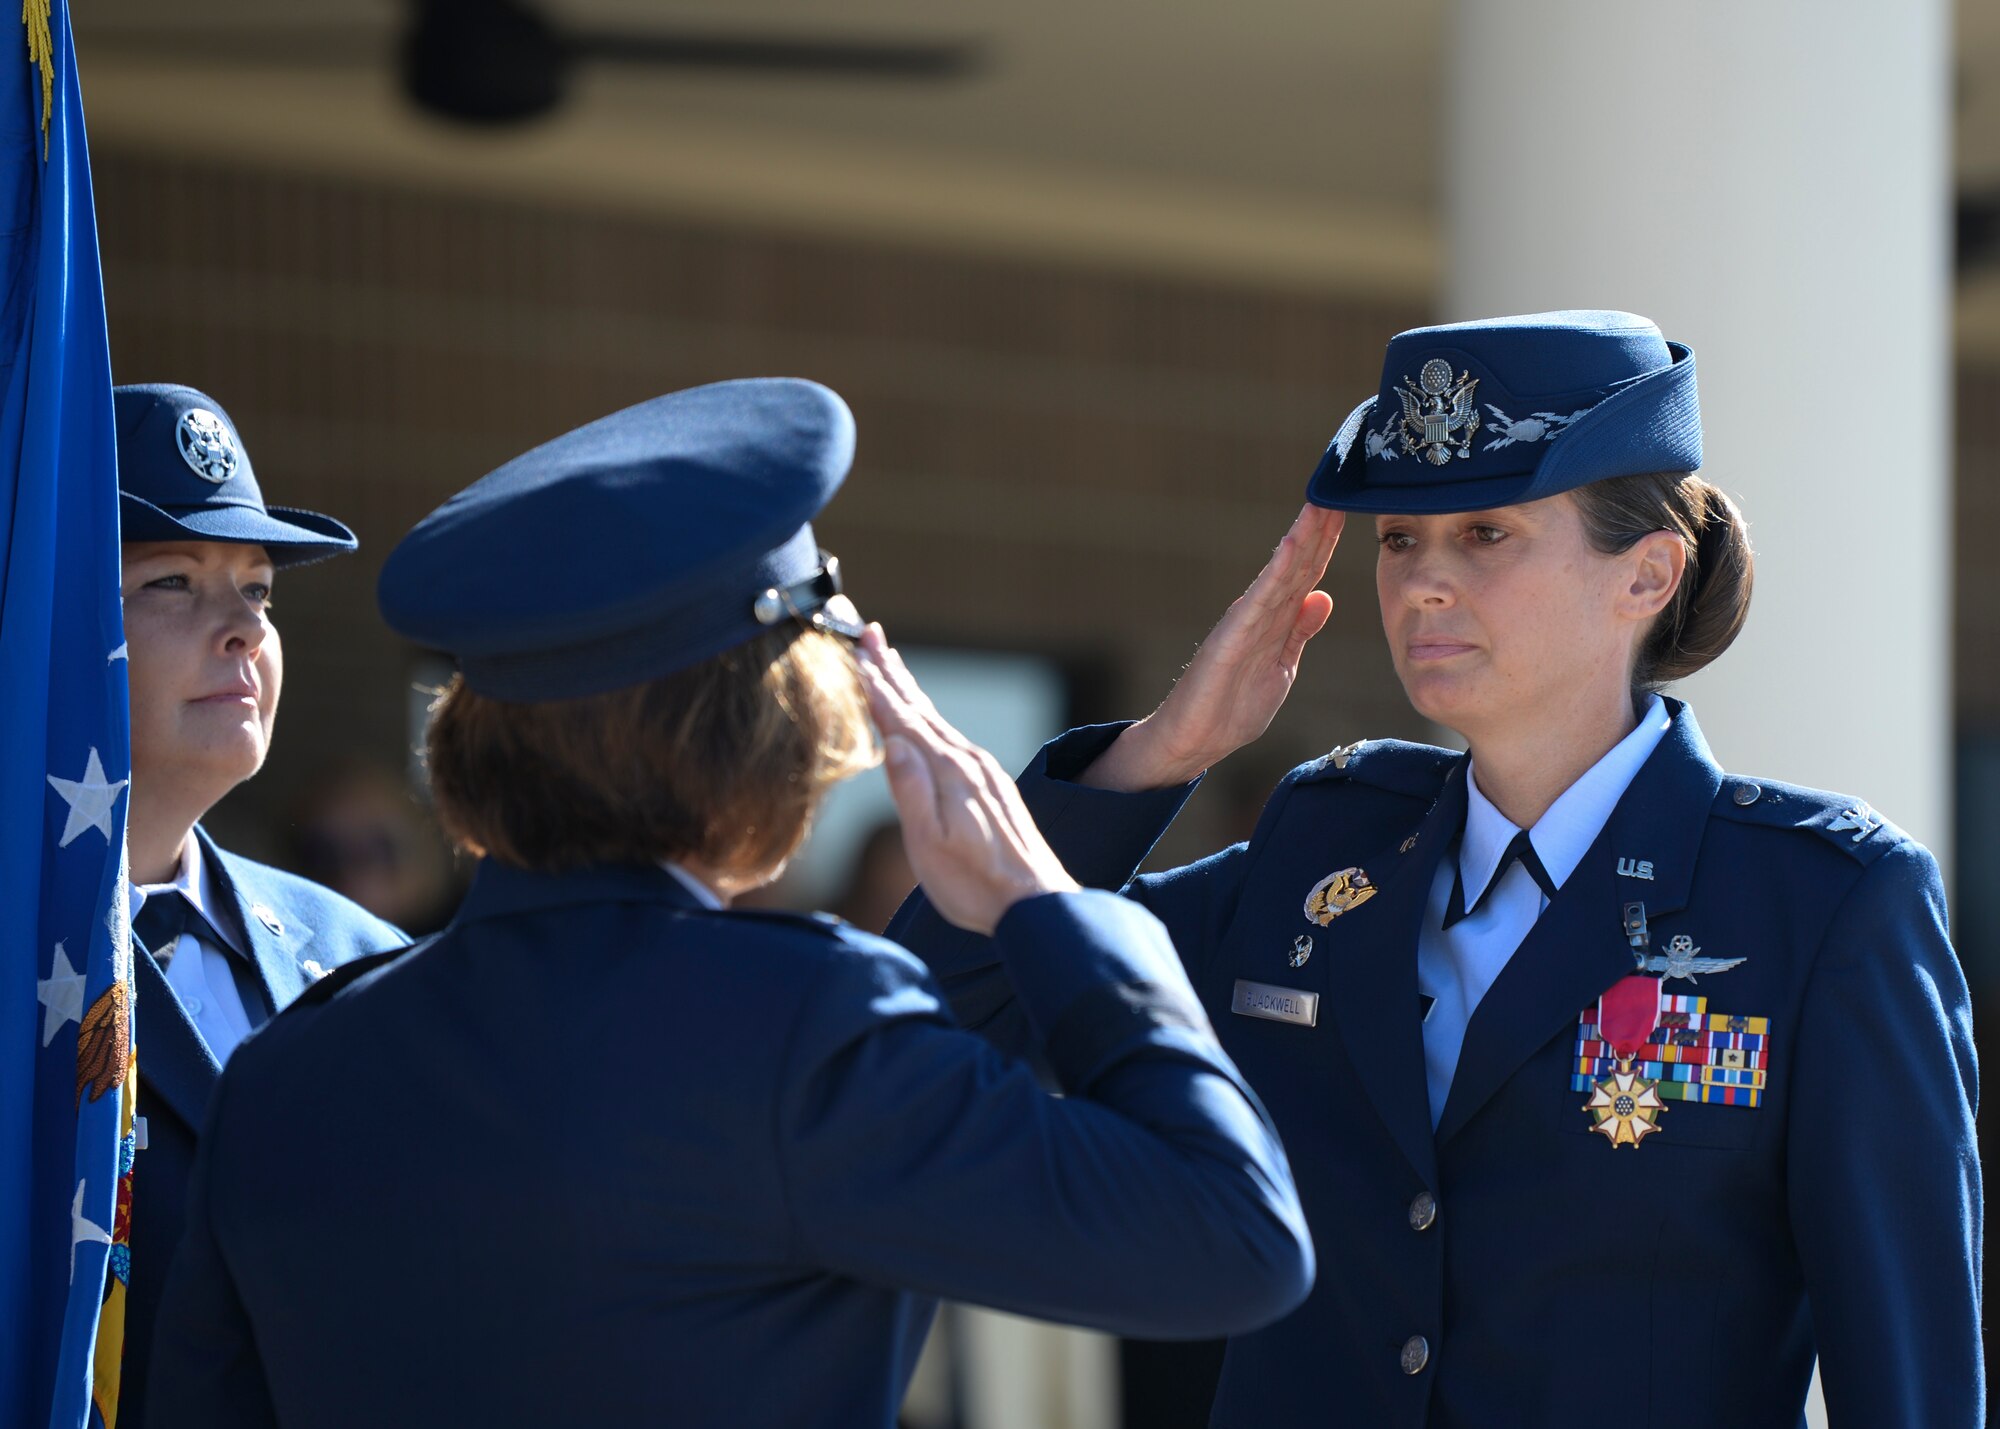 U.S. Air Force Col. Heather Blackwell, outgoing 81st Training Wing commander, salutes Maj. Gen. Andrea Tullos, Second Air Force commander, during the change of command ceremony on the Levitow Training Support Facility drill pad at Keesler Air Force Base, Mississippi, June 17, 2021. The ceremony is a symbol of command being exchanged from one commander to the next by the handing-off of a ceremonial guidon. Blackwell is now assigned to the Air Combat Command. (U.S. Air Force photo by Senior Airman Spencer Tobler)